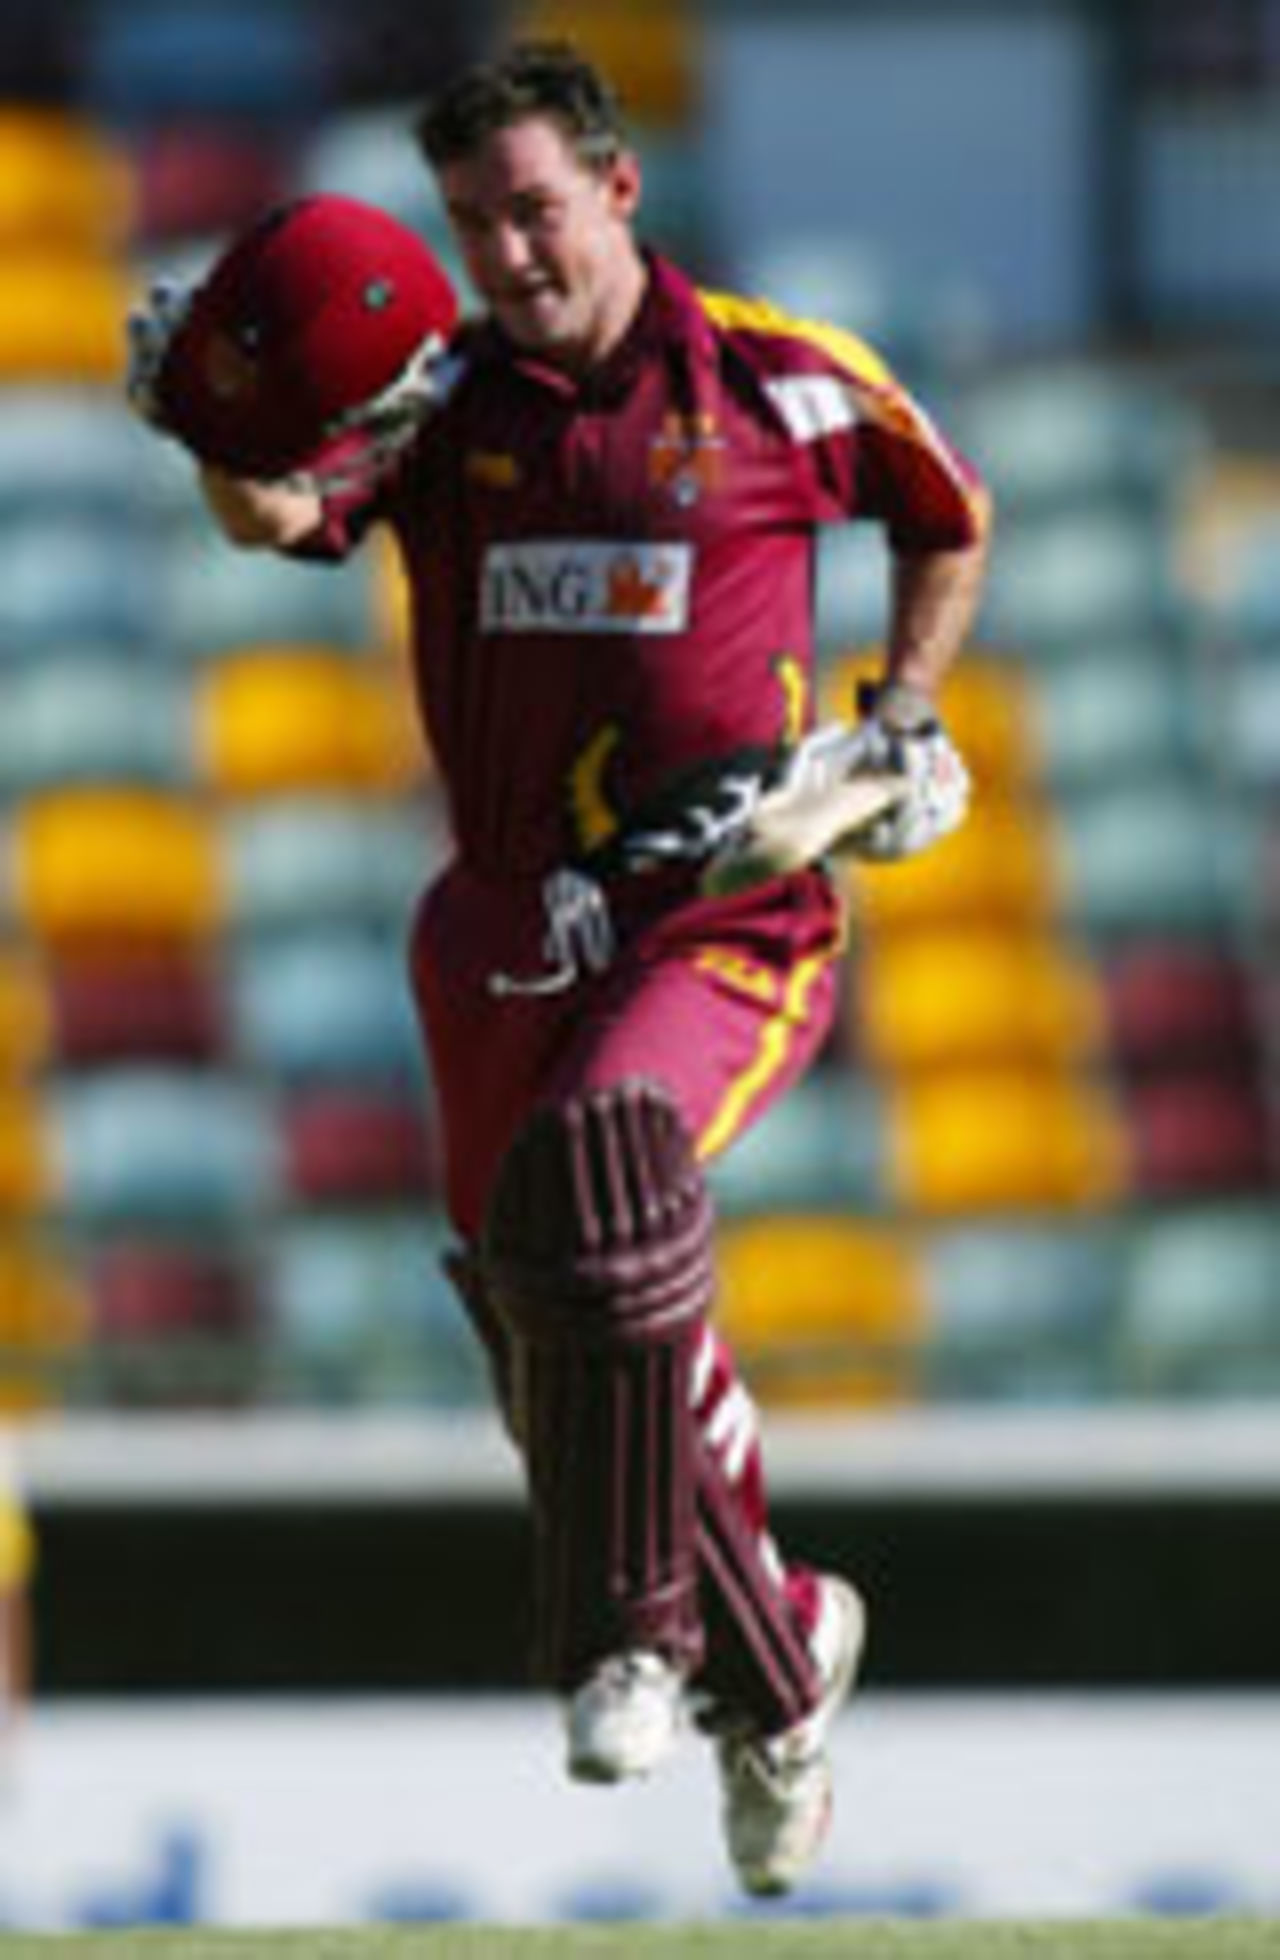 Jimmy Maher jumps for joy after his hundred, Queensland v Western Australia, ING Cup, Gabba, February 13, 2004